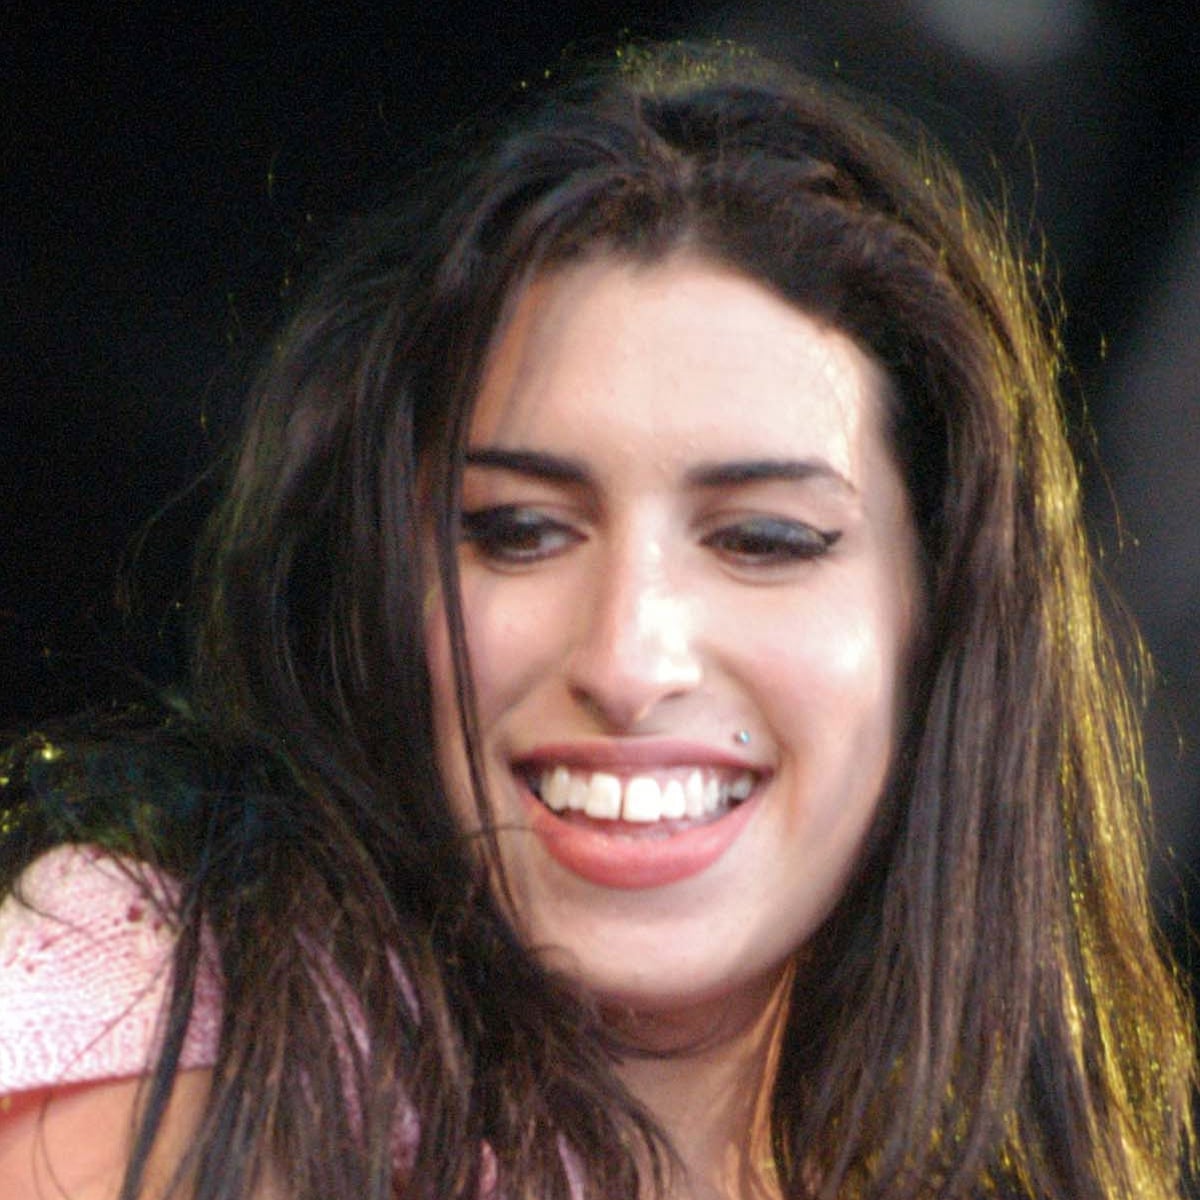 Amy Winehouse, Glastonbury 2004: coaxing rainbows from the clouds ...